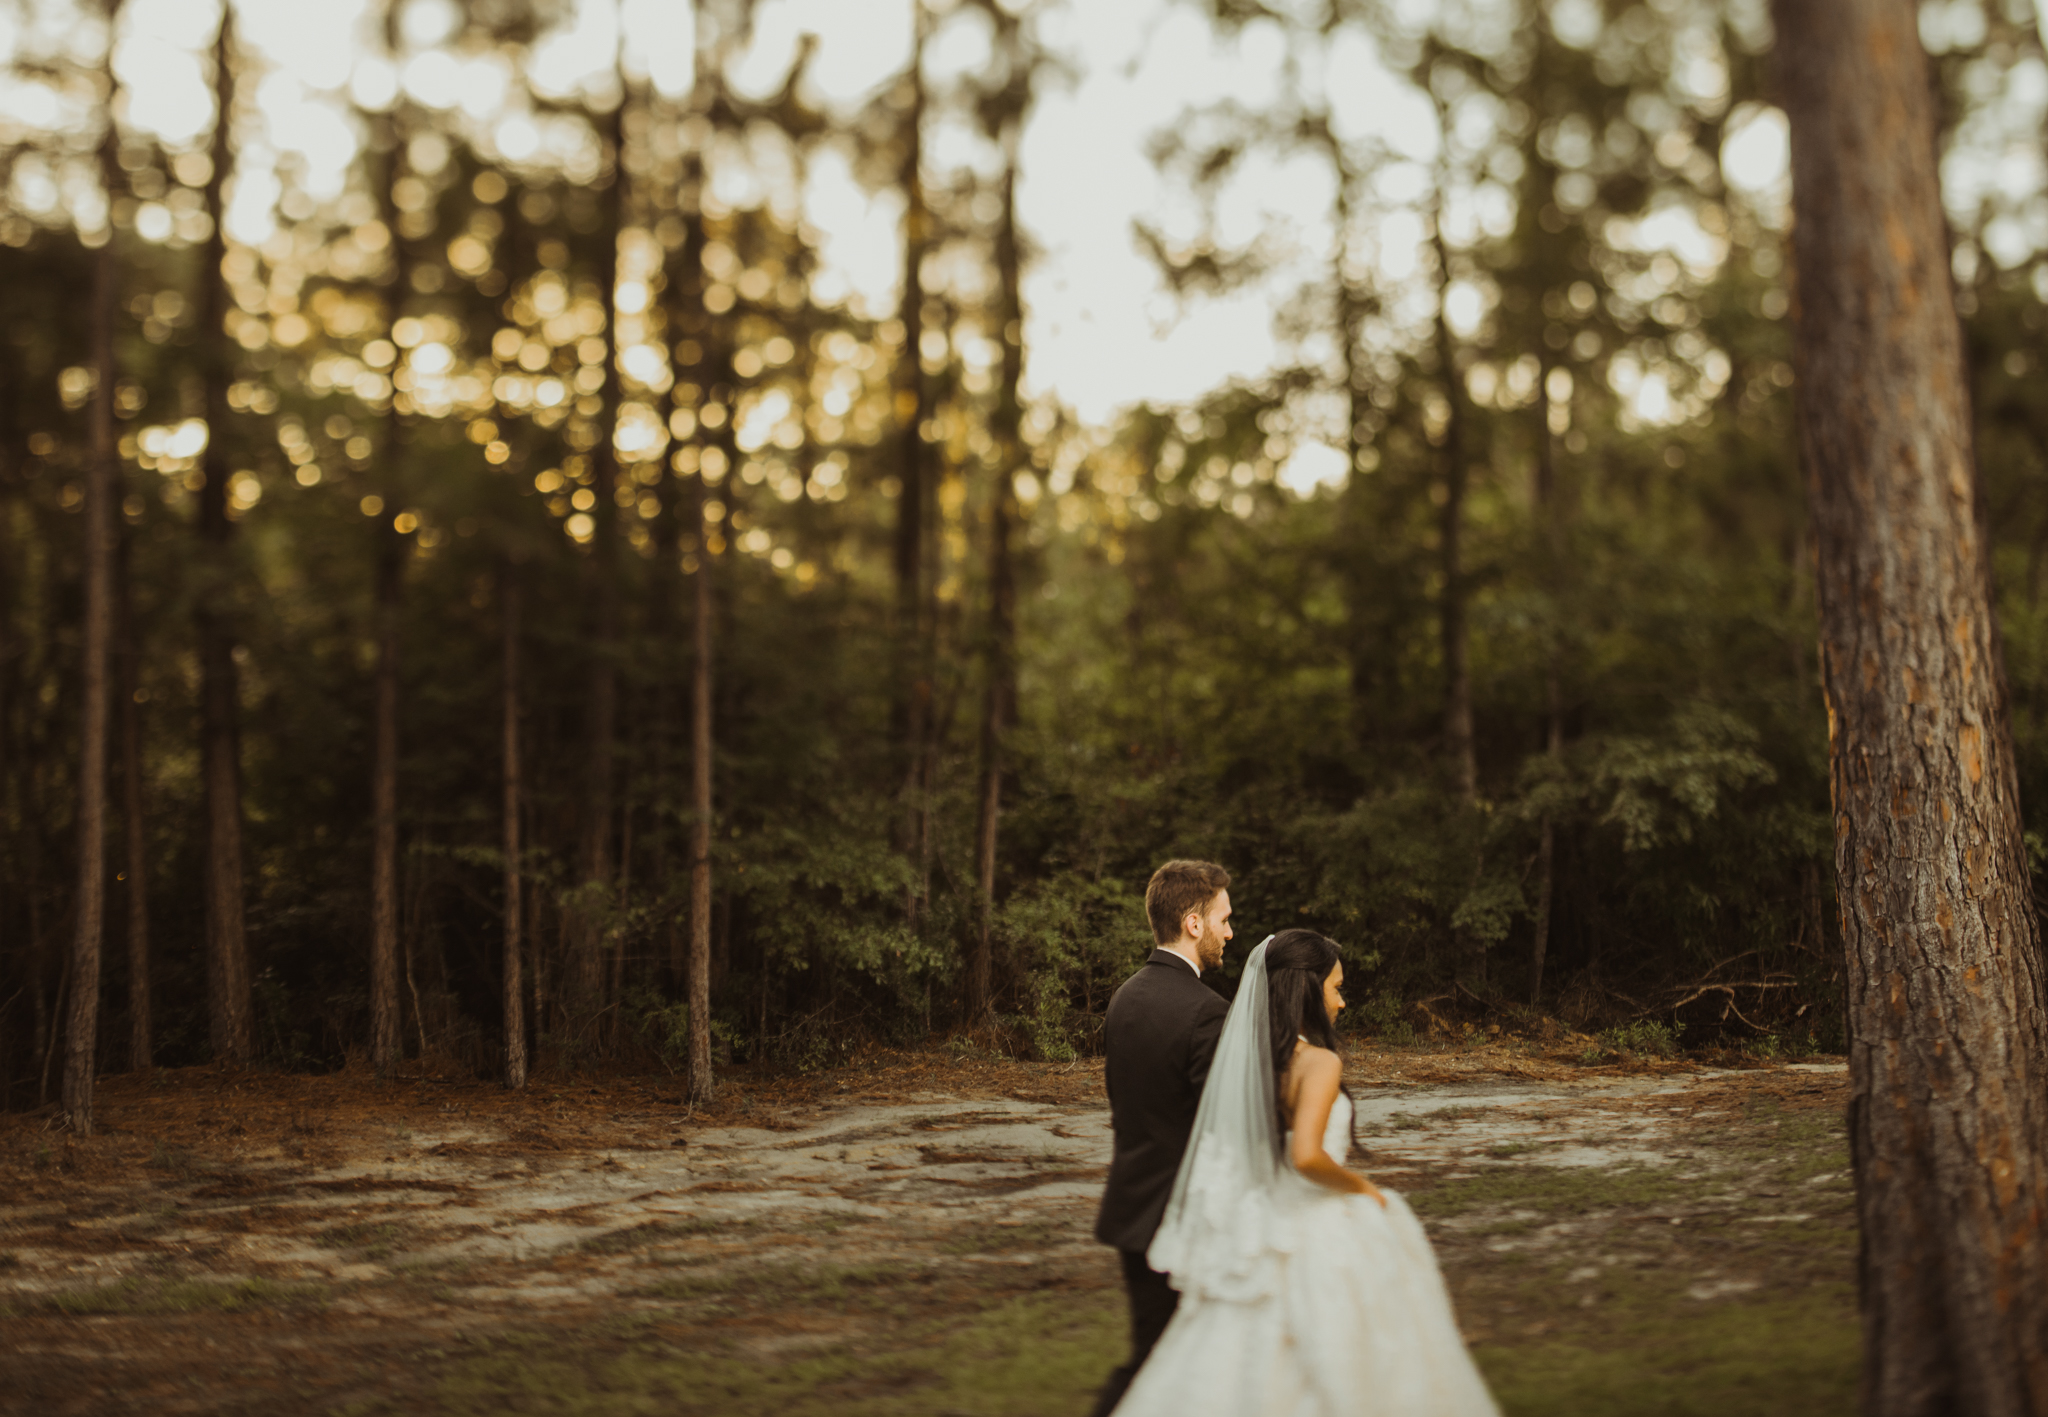 ©Isaiah & Taylor Photography - Lakeside Barn Wedding, Private Estate, Poplarville Mississippi-100.jpg